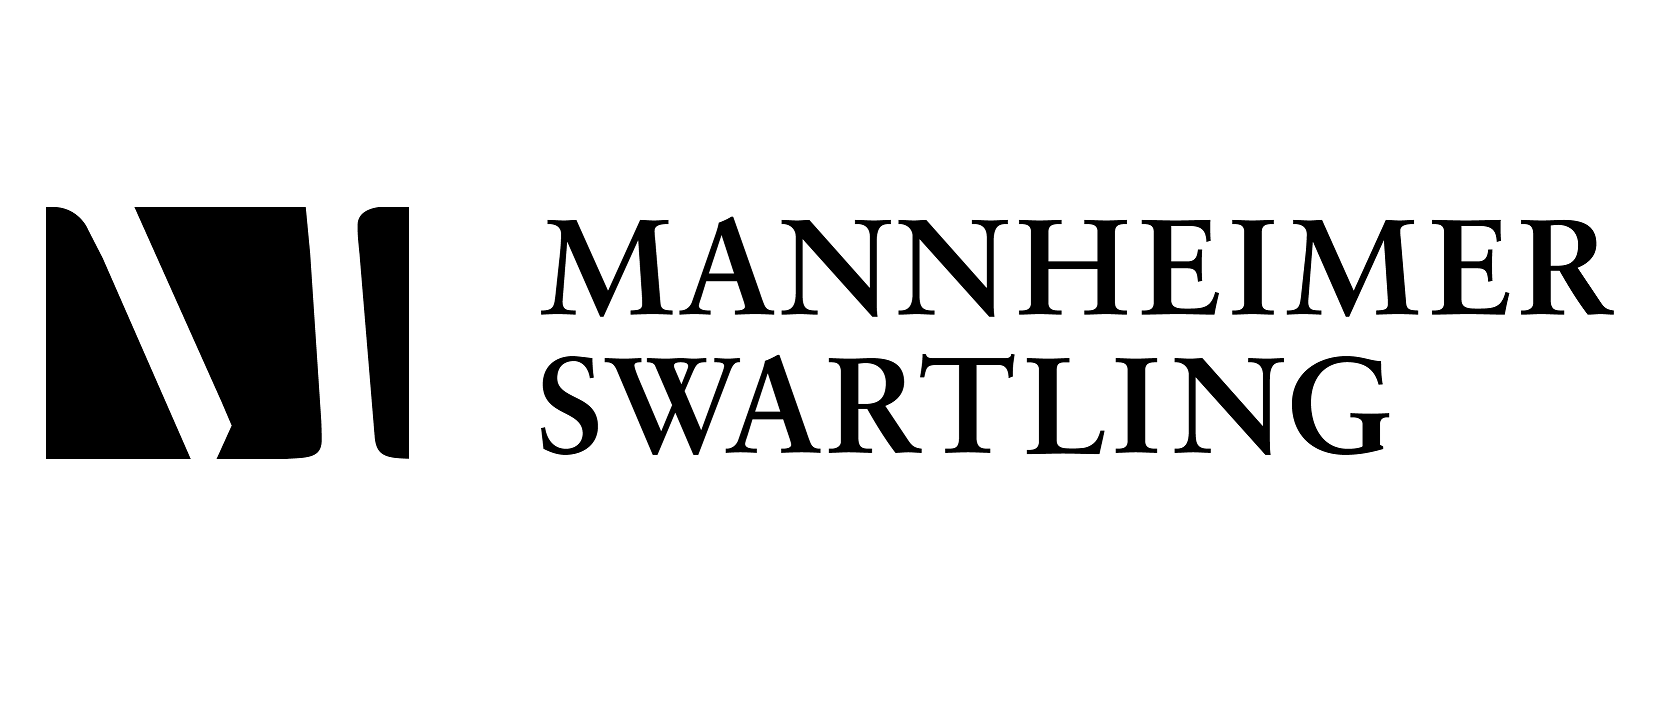 Mannheimer Swartling - Preato Capital has sold Sefina Finance to Dollar Financial Group